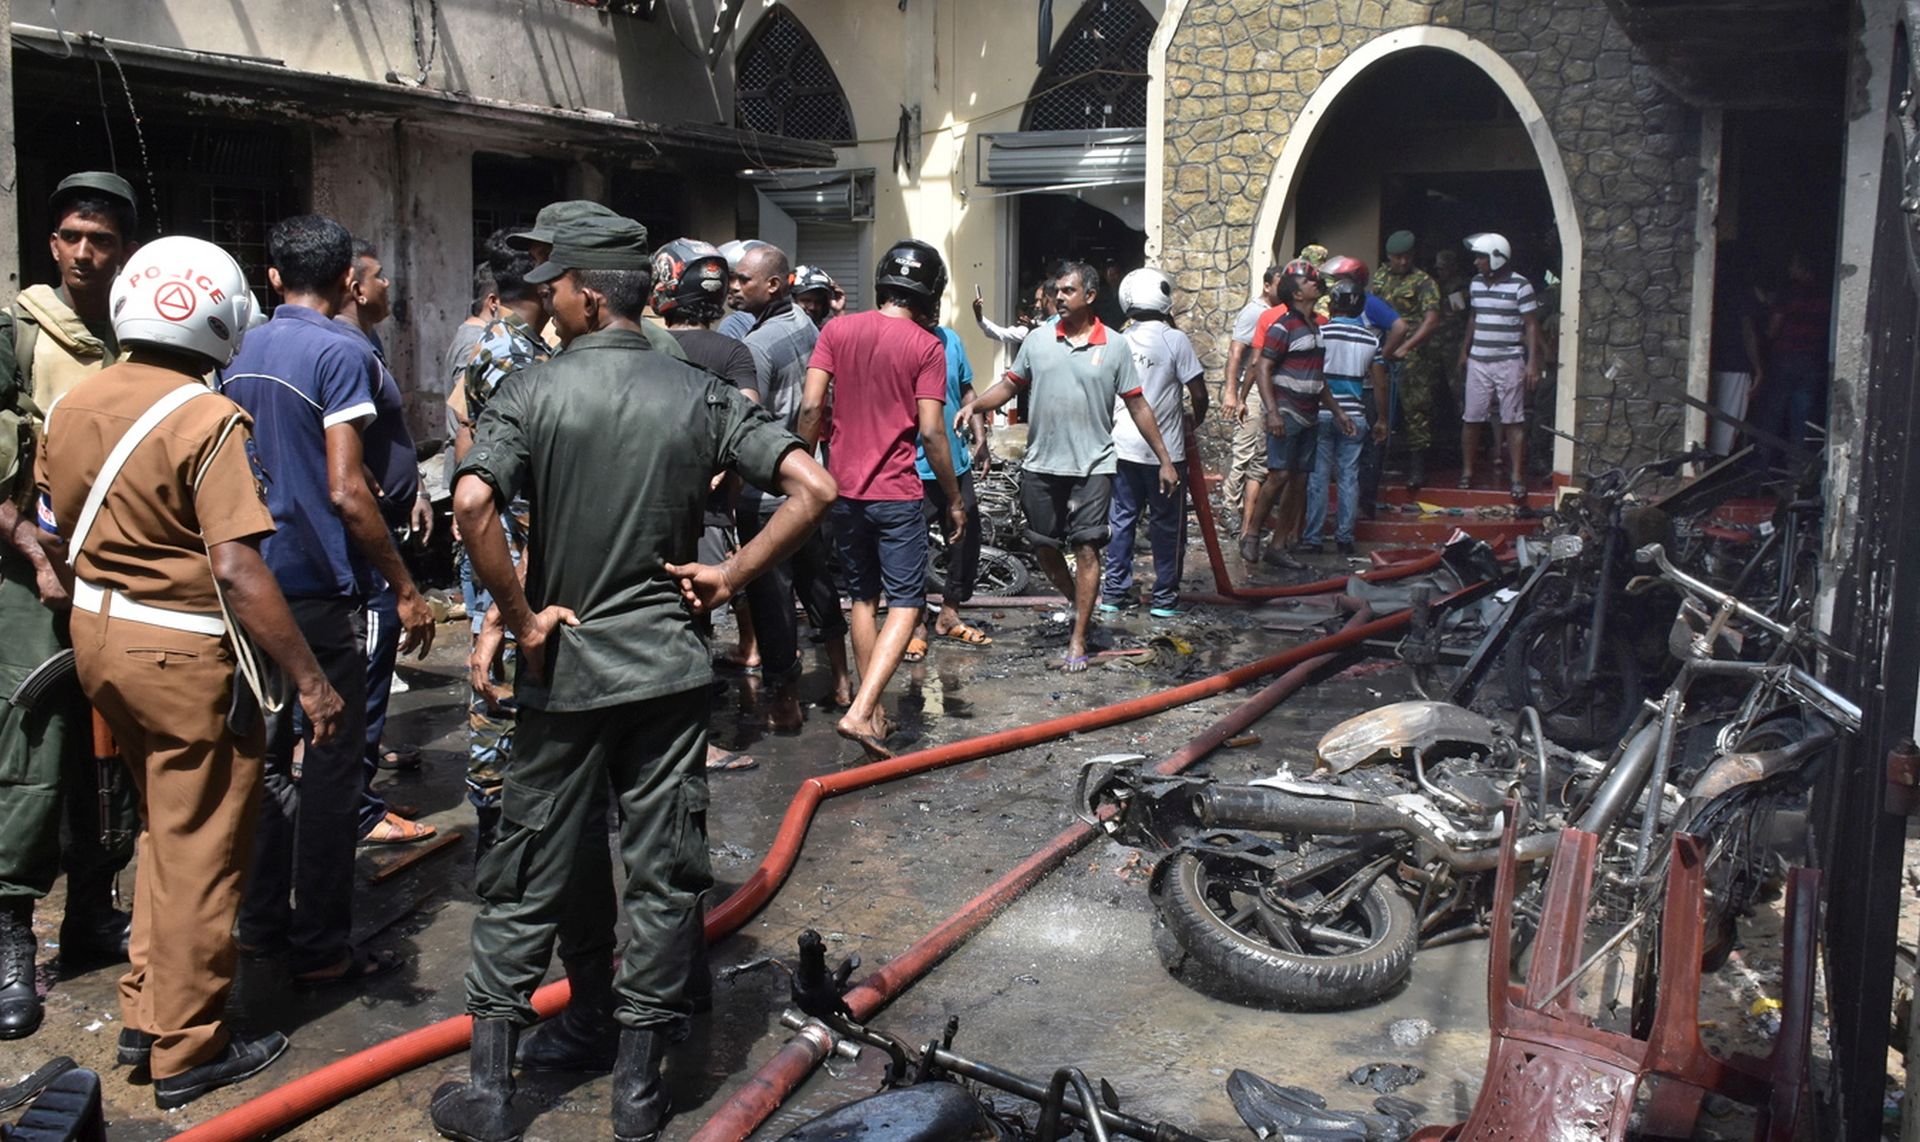 epa07518955 Locals and police gather at the Secon church Batticalova central road in Colombo, Sri Lanka, 21 April 2019. According to the news reports at least 138 people killed and over 400 injured in a series of blasts during the Easter Sunday service at St Anthony's Church in Kochchikade, Shangri-La Hotel and Kingsbury Hotel with many more places.  EPA/M.A. PUSHPA KUMARA